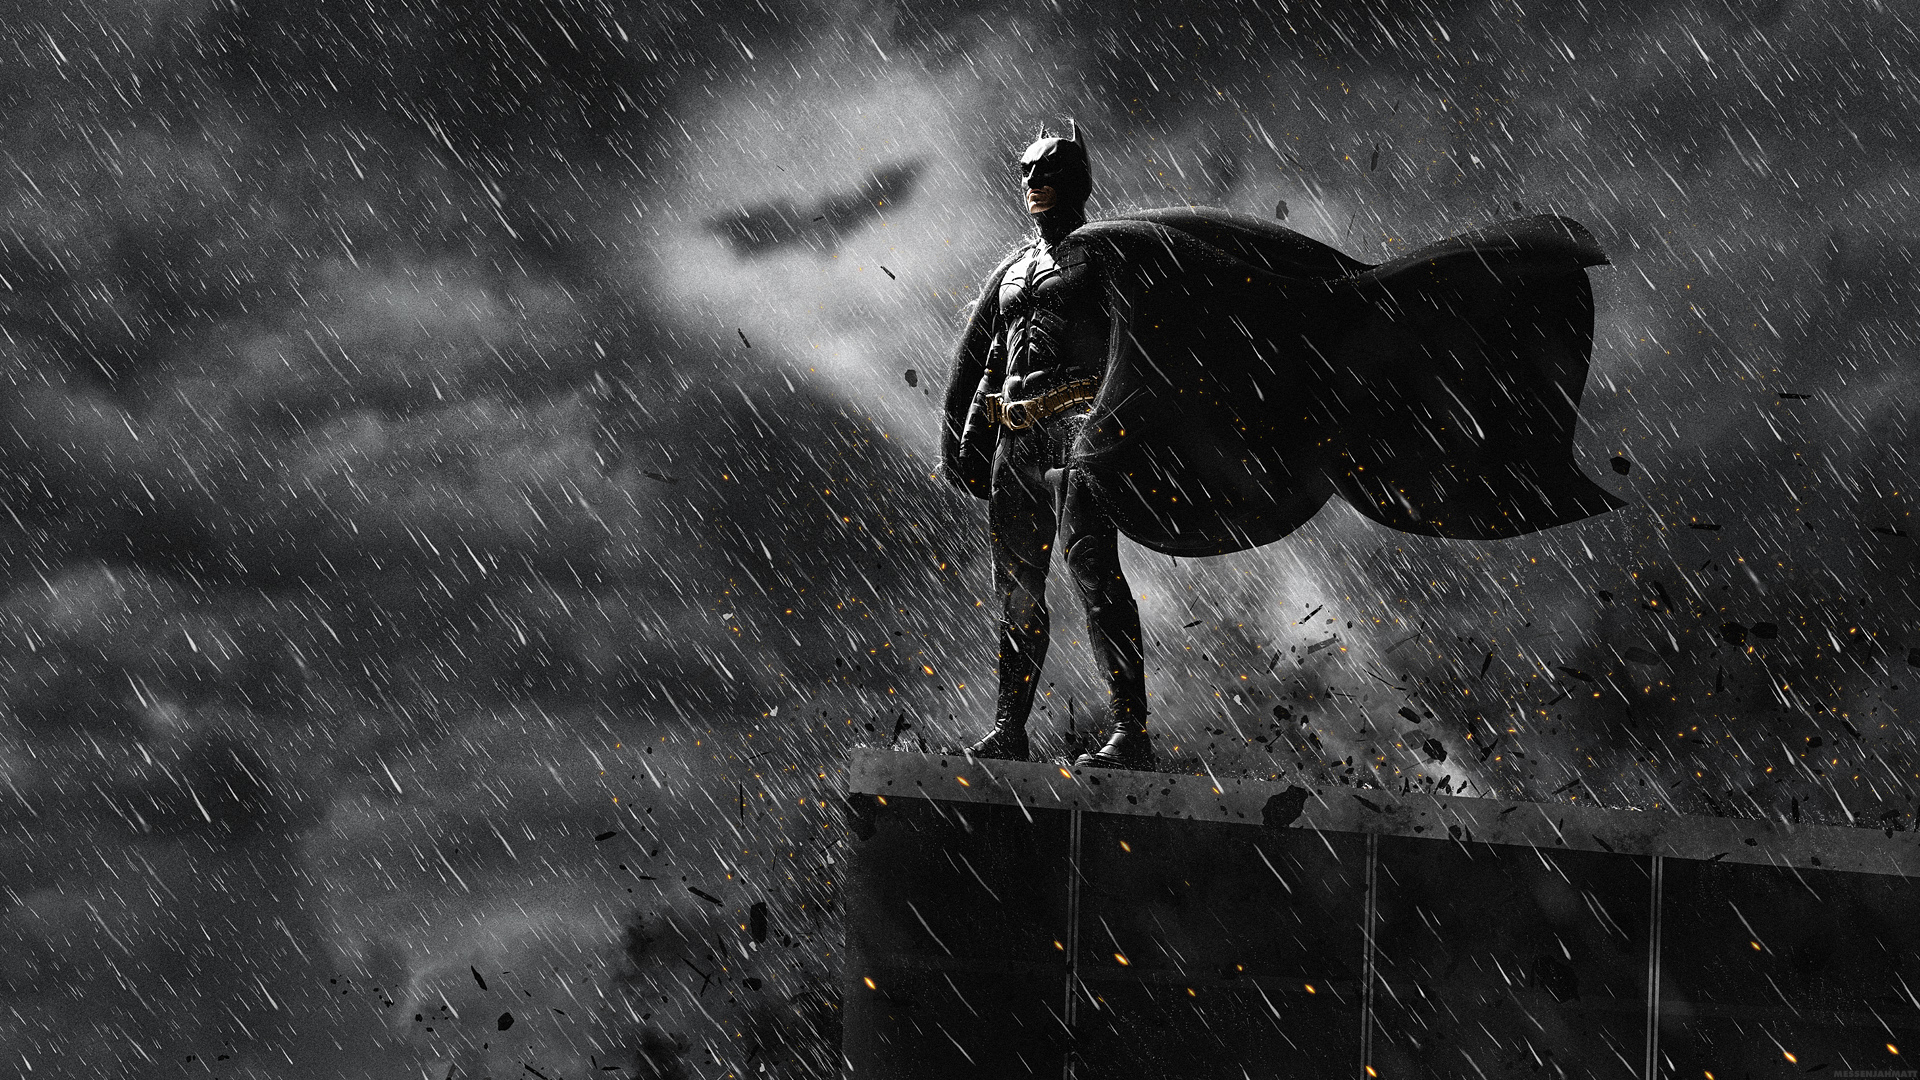 The Dark Knight Rises Wallpaper Set 2 Awesome Wallpapers